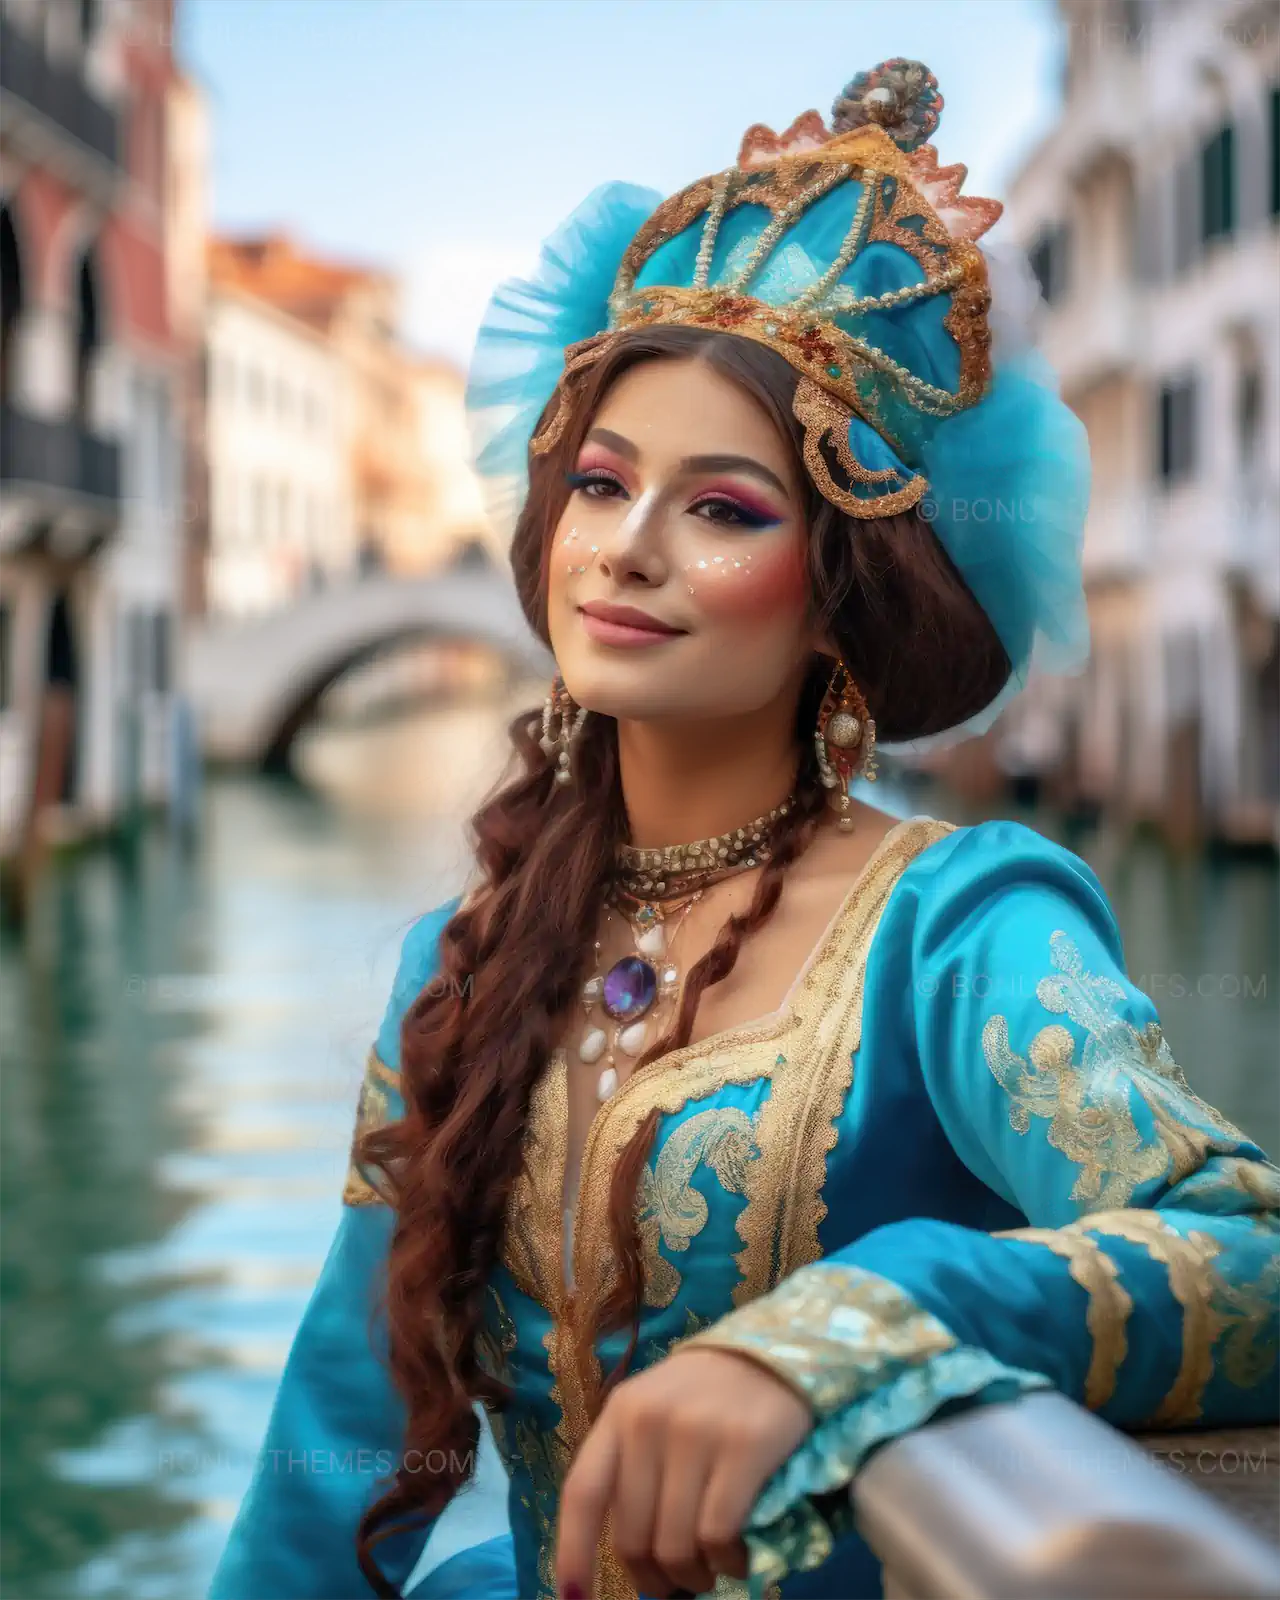 Beautiful woman at the Venice carnival with emotive eyes